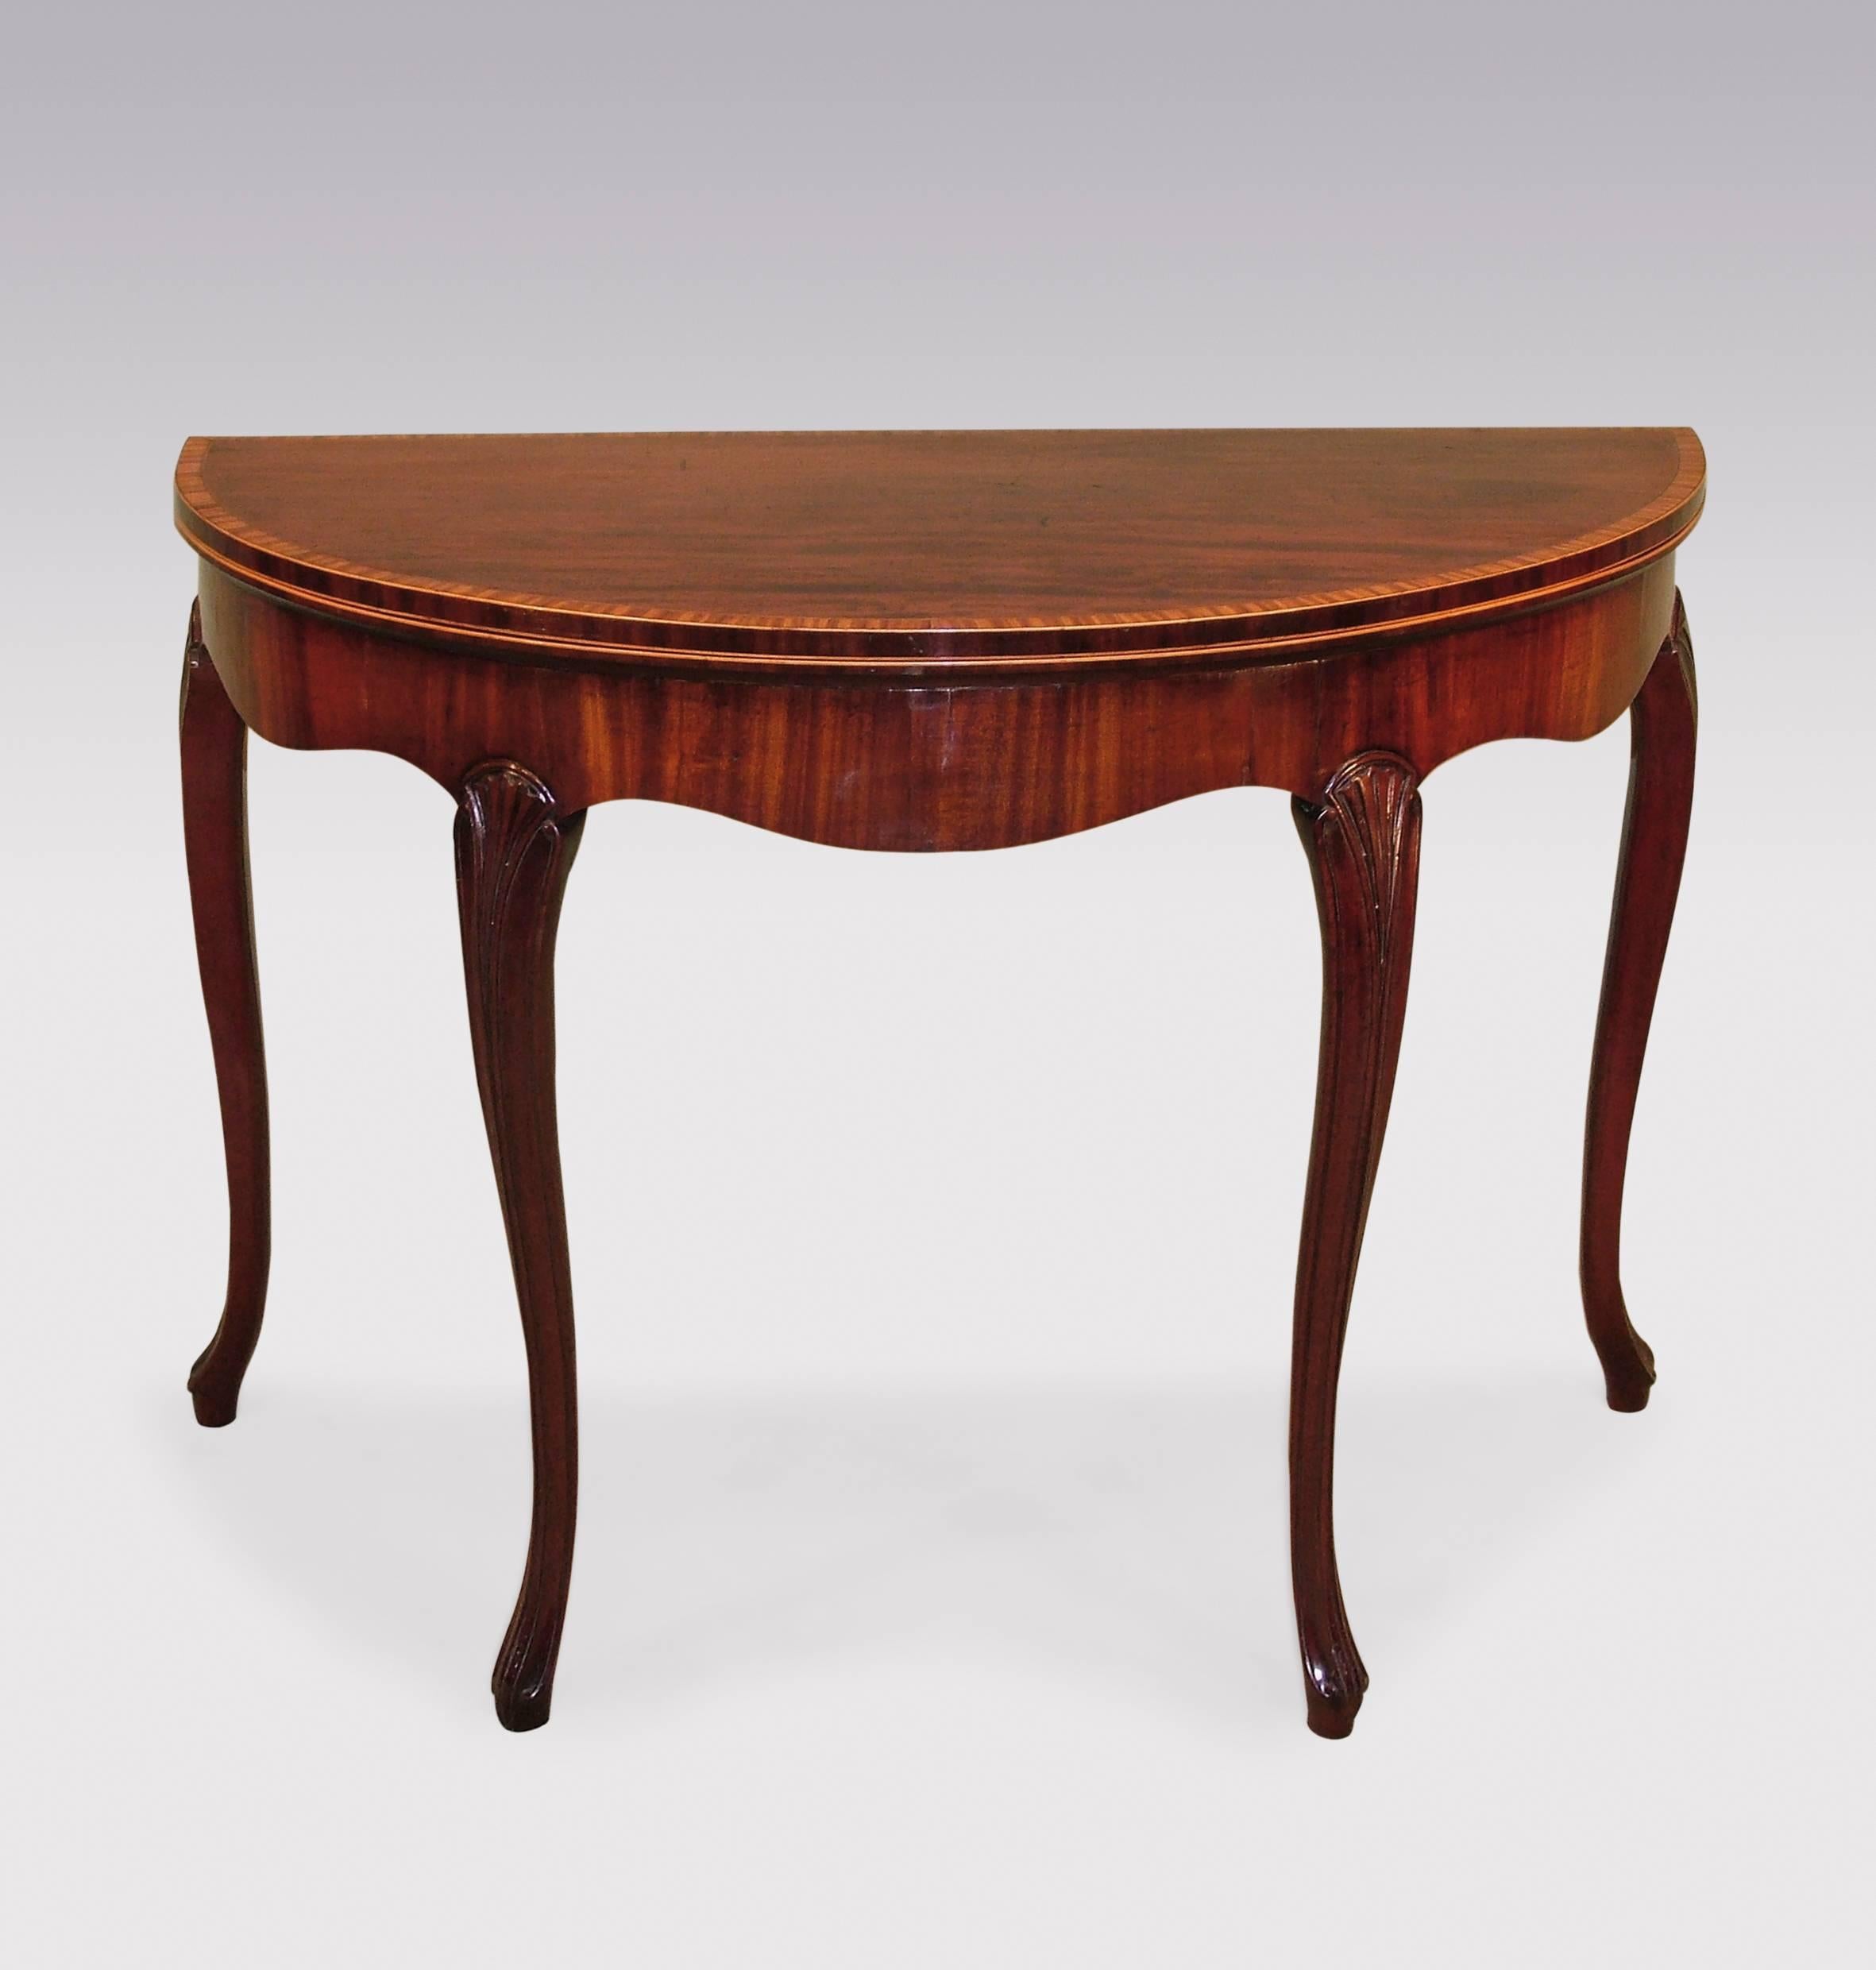 A fine pair of late 18th century George III period ‘transitional’ figured mahogany card tables, having boxwood and ebony strung, satinwood crossbanded half round tops, above serpentine shaped friezes, supported on carved and fluted cabriole legs,